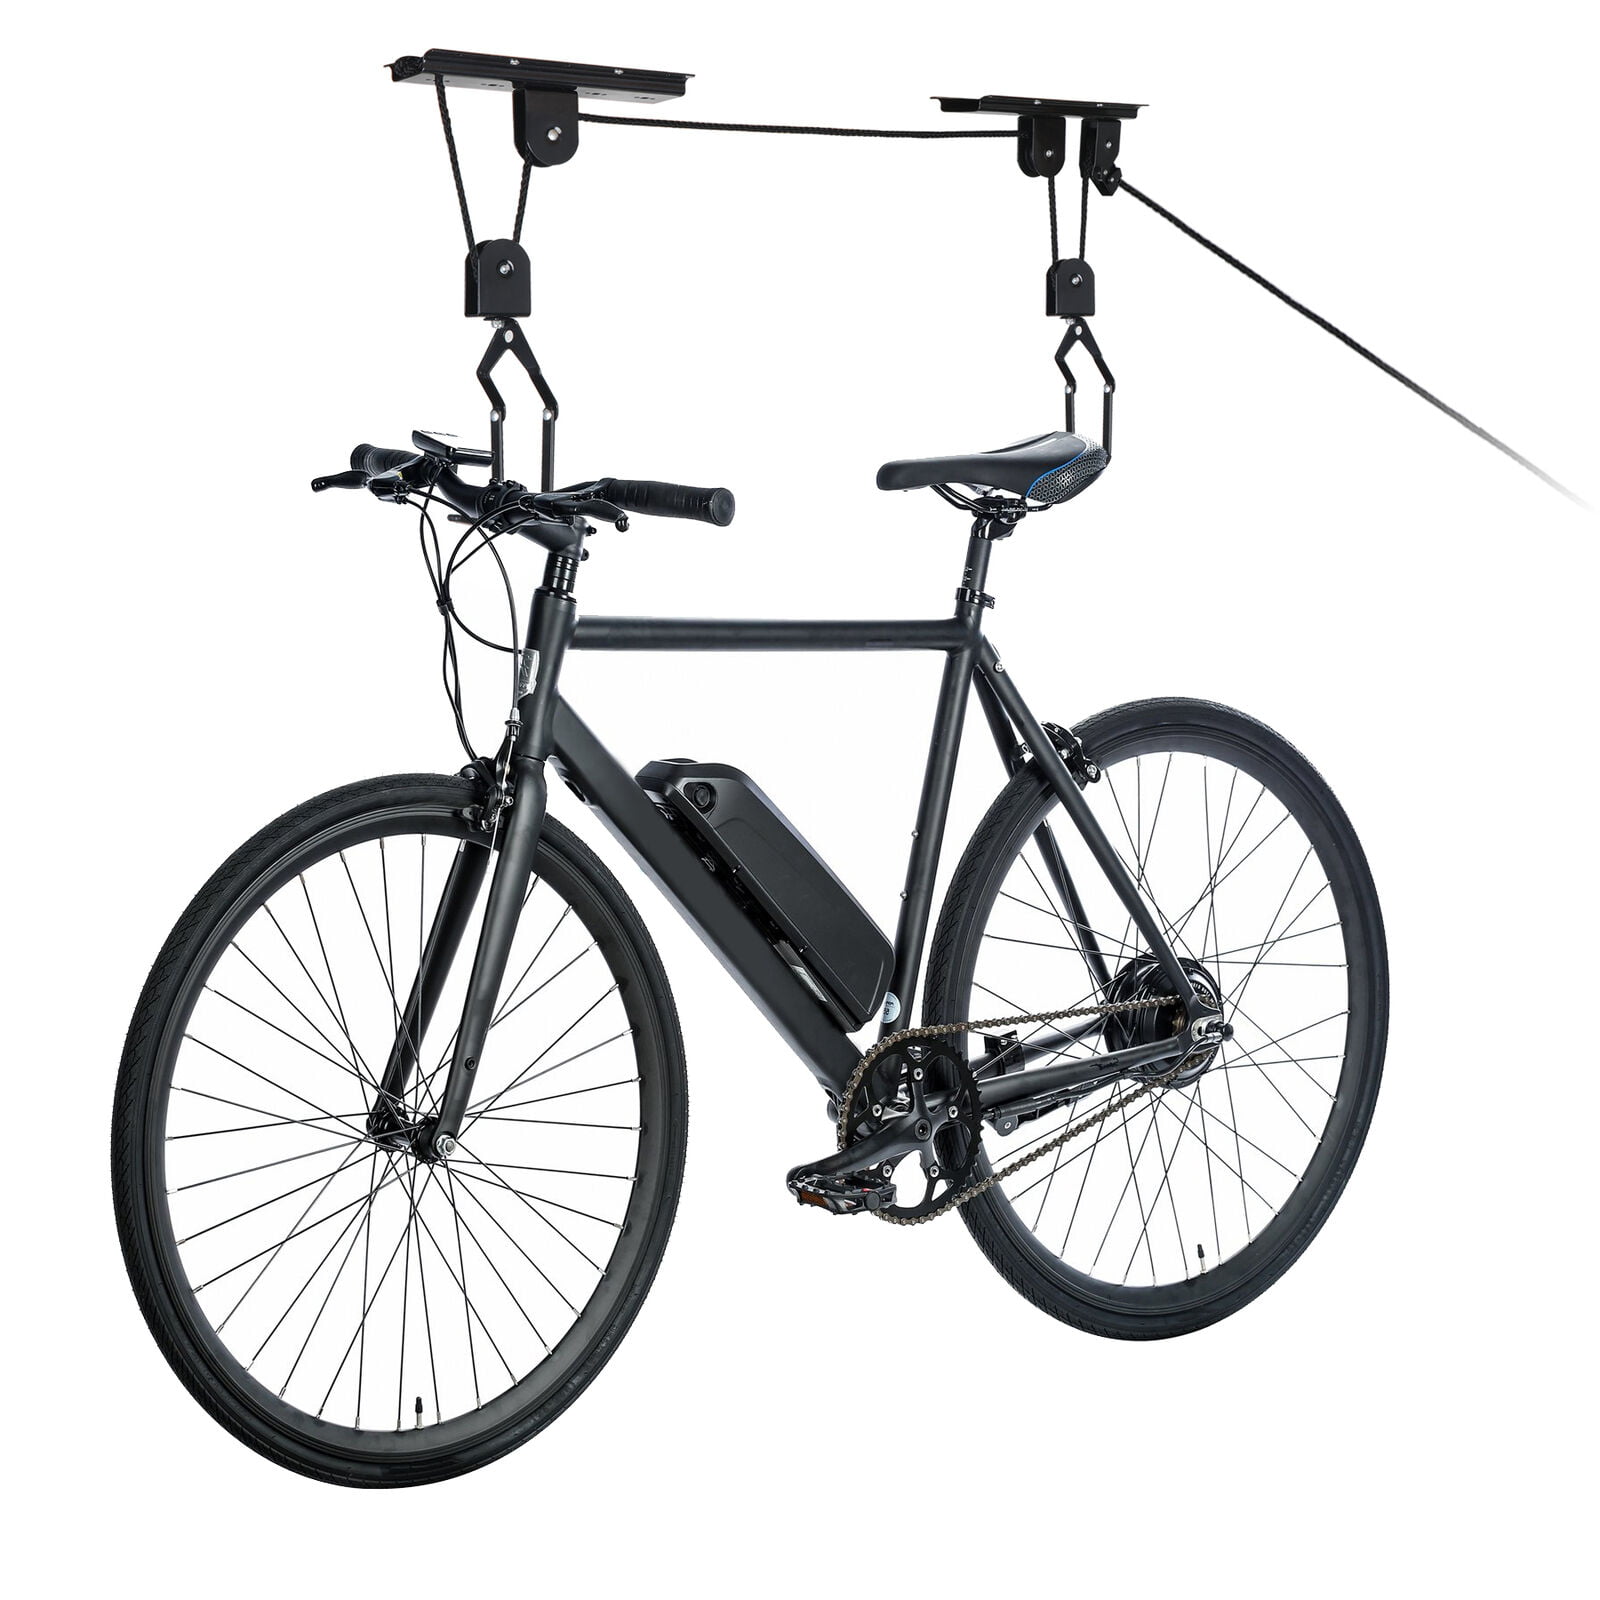 Heavy Duty Mountain Bicycle Bike Hoist Bicycle Lift for Garage Ceiling Storage 